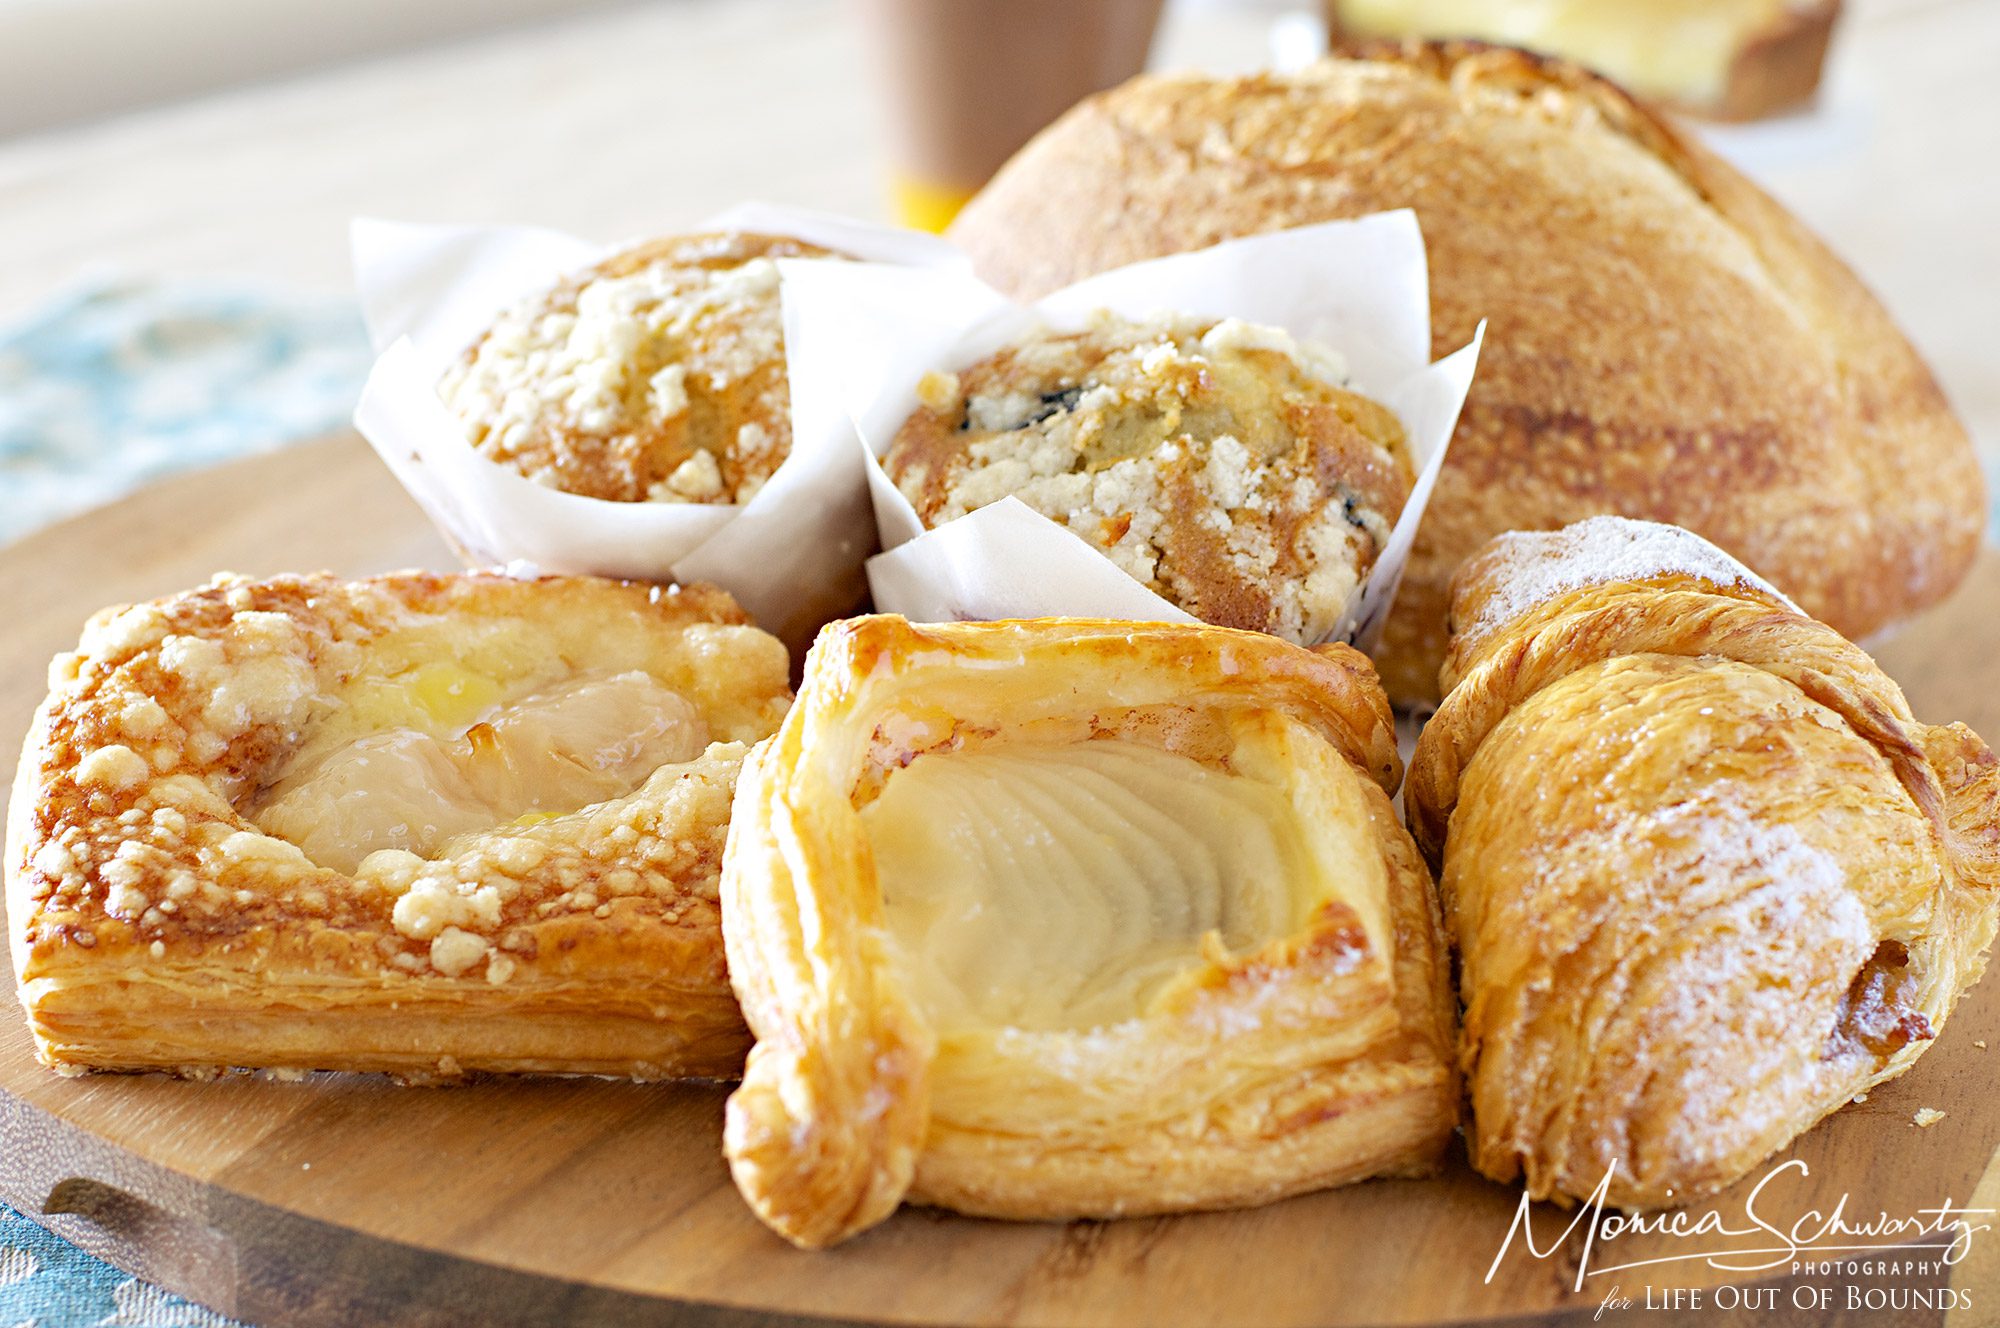 Assorted-pastries-muffins-and-breads-by-Fendu-Boulangerie-in-Honolulu-Hawaii